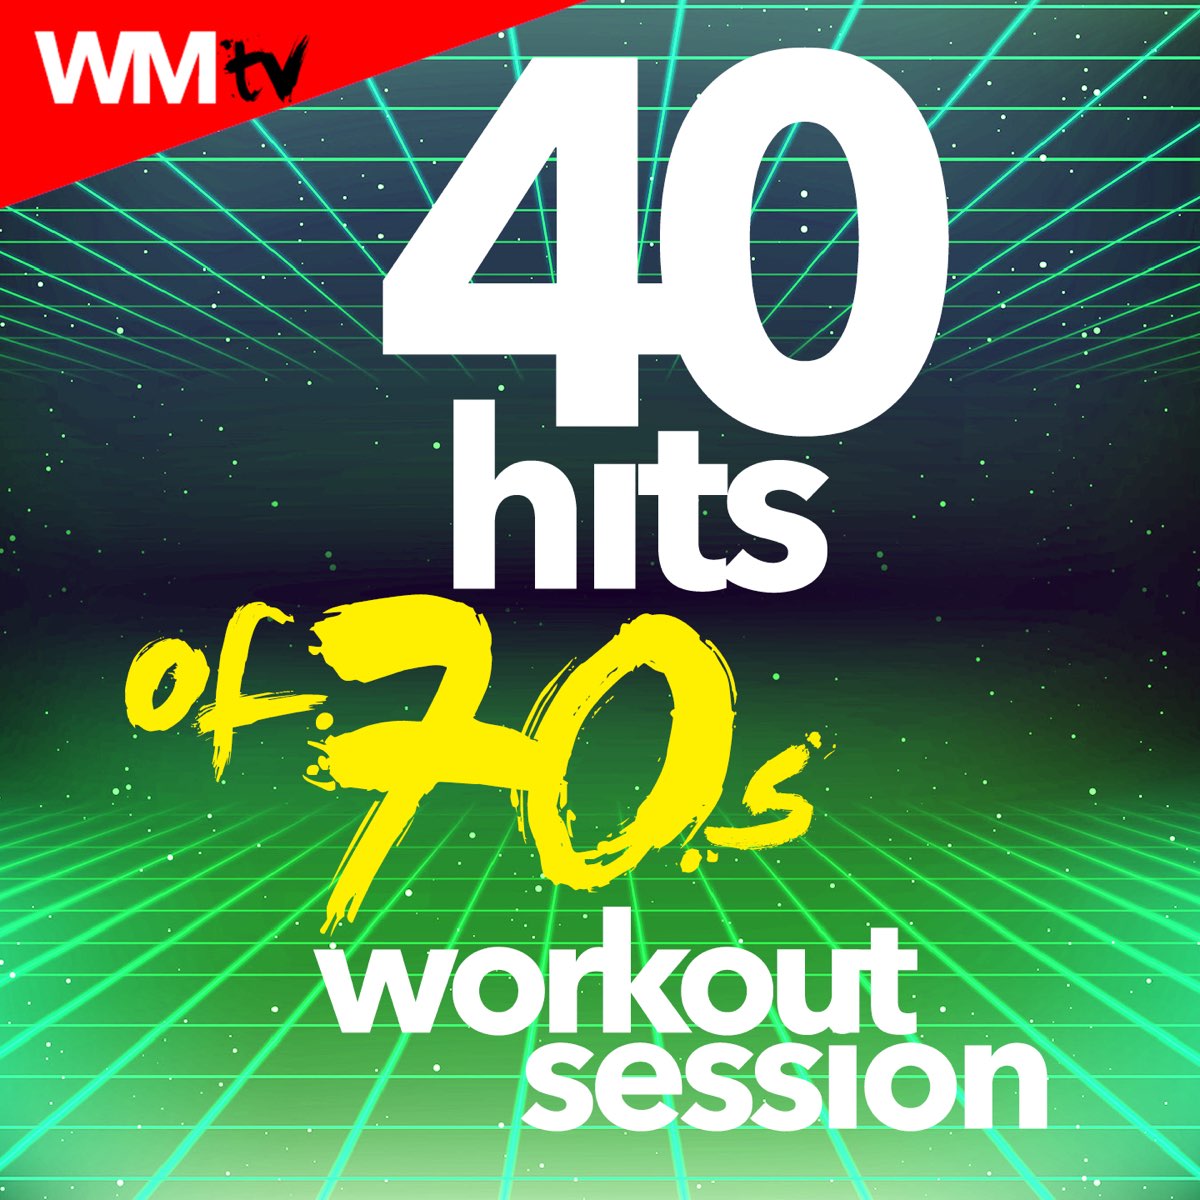 Download Workout Music album songs: Biggest Hits! 70s 80s 90s Workout Music